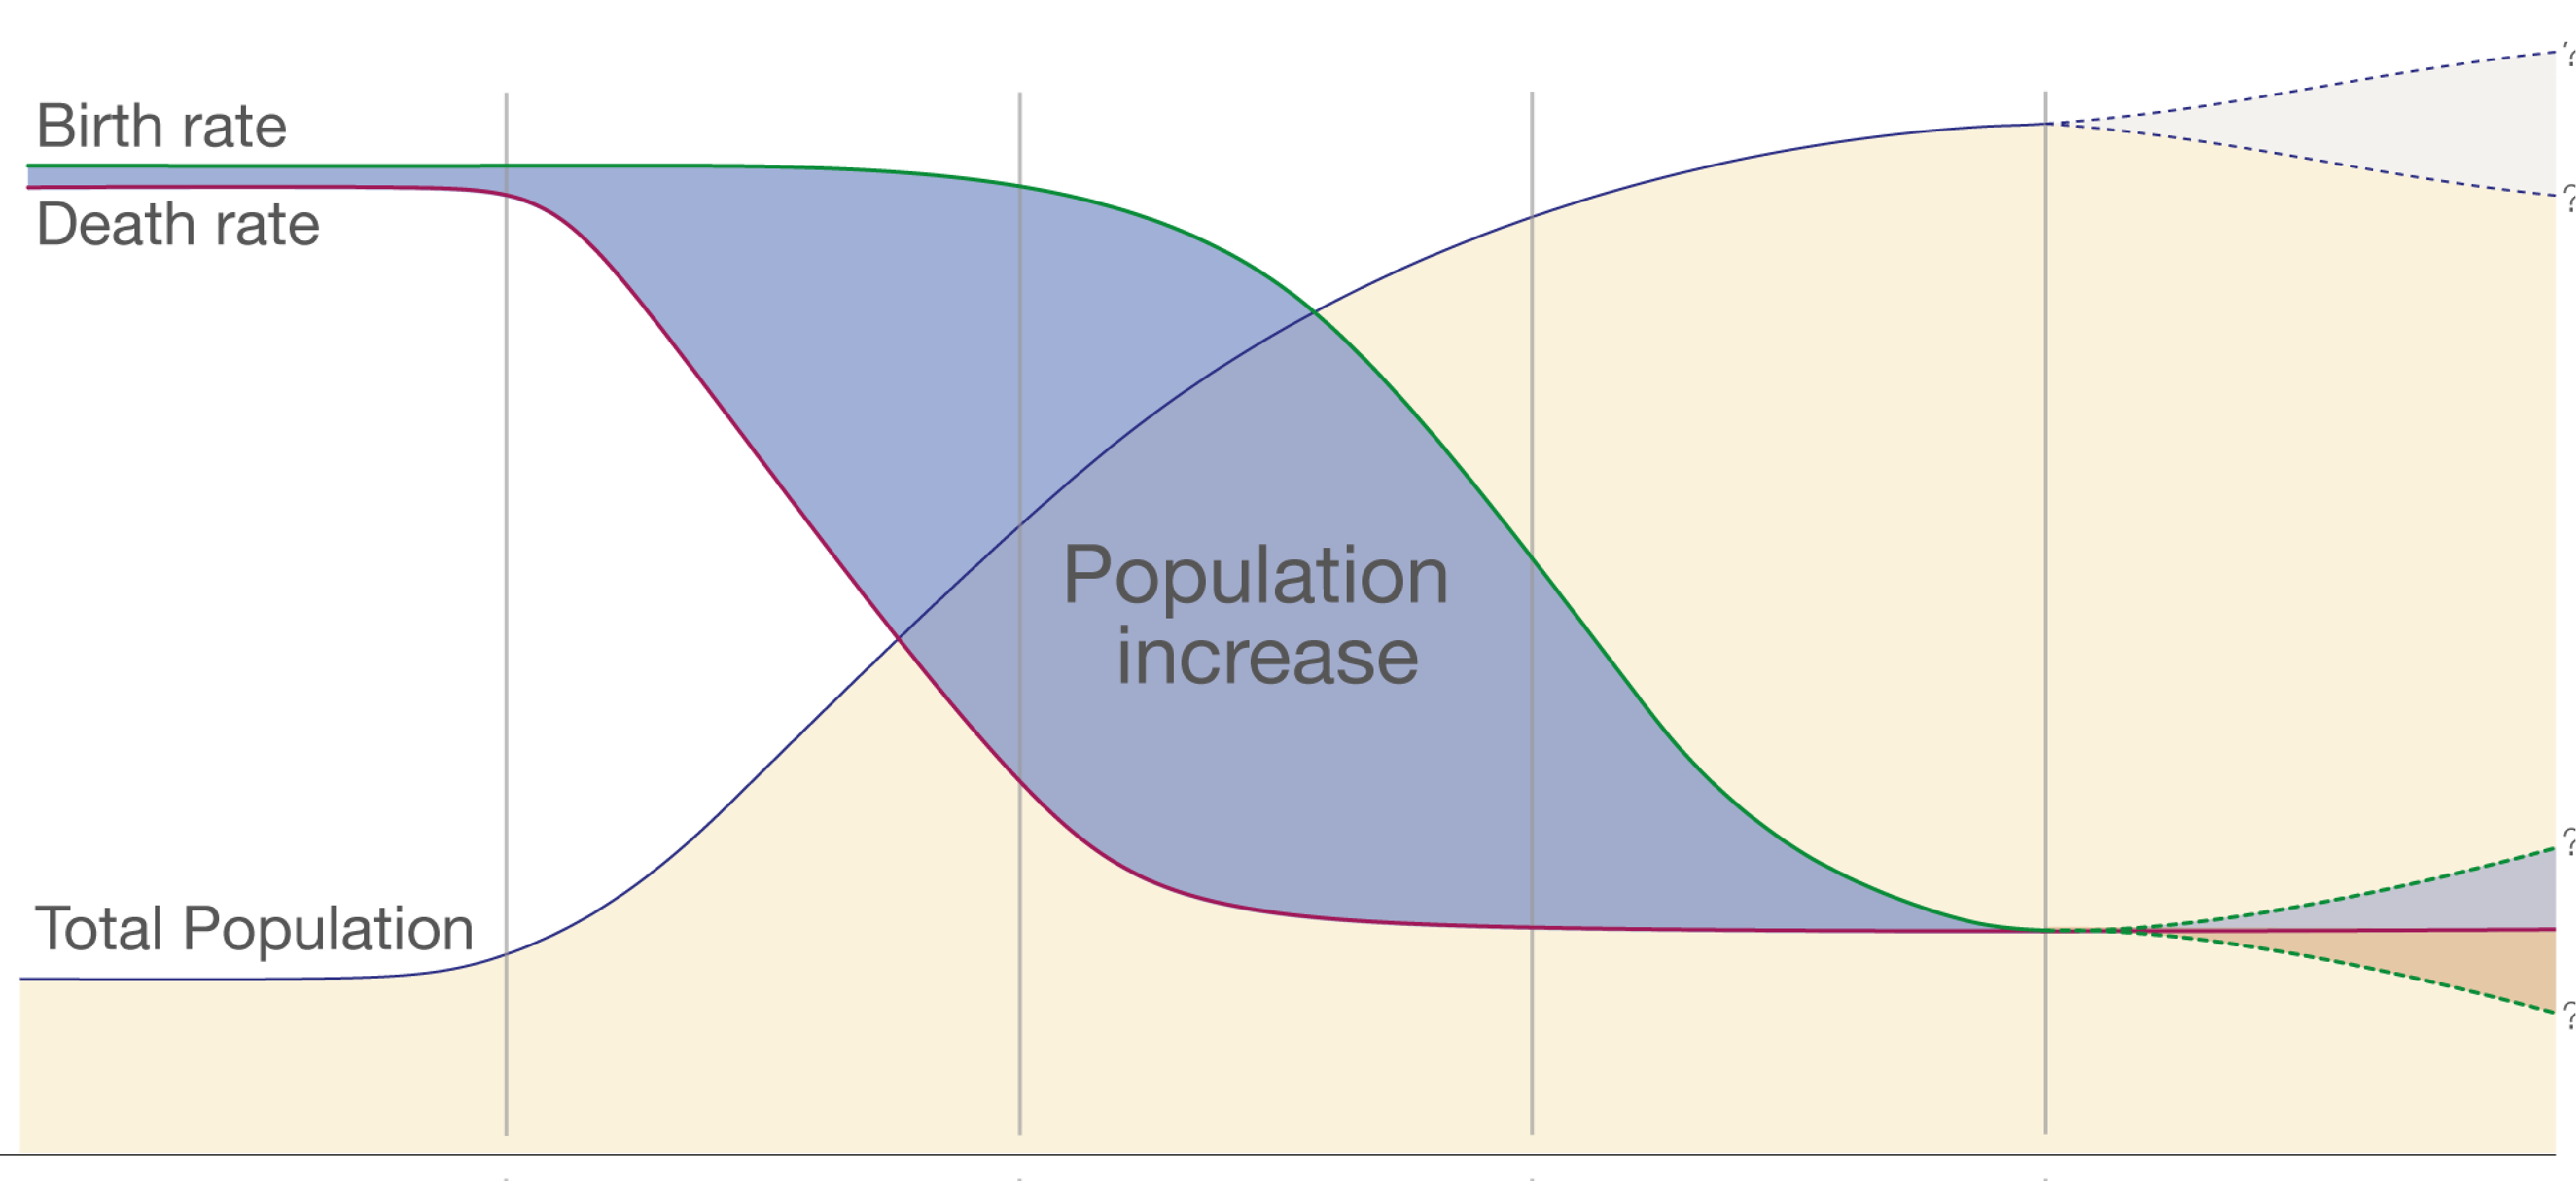 15-mind-blowing-facts-about-demographic-transition-theory